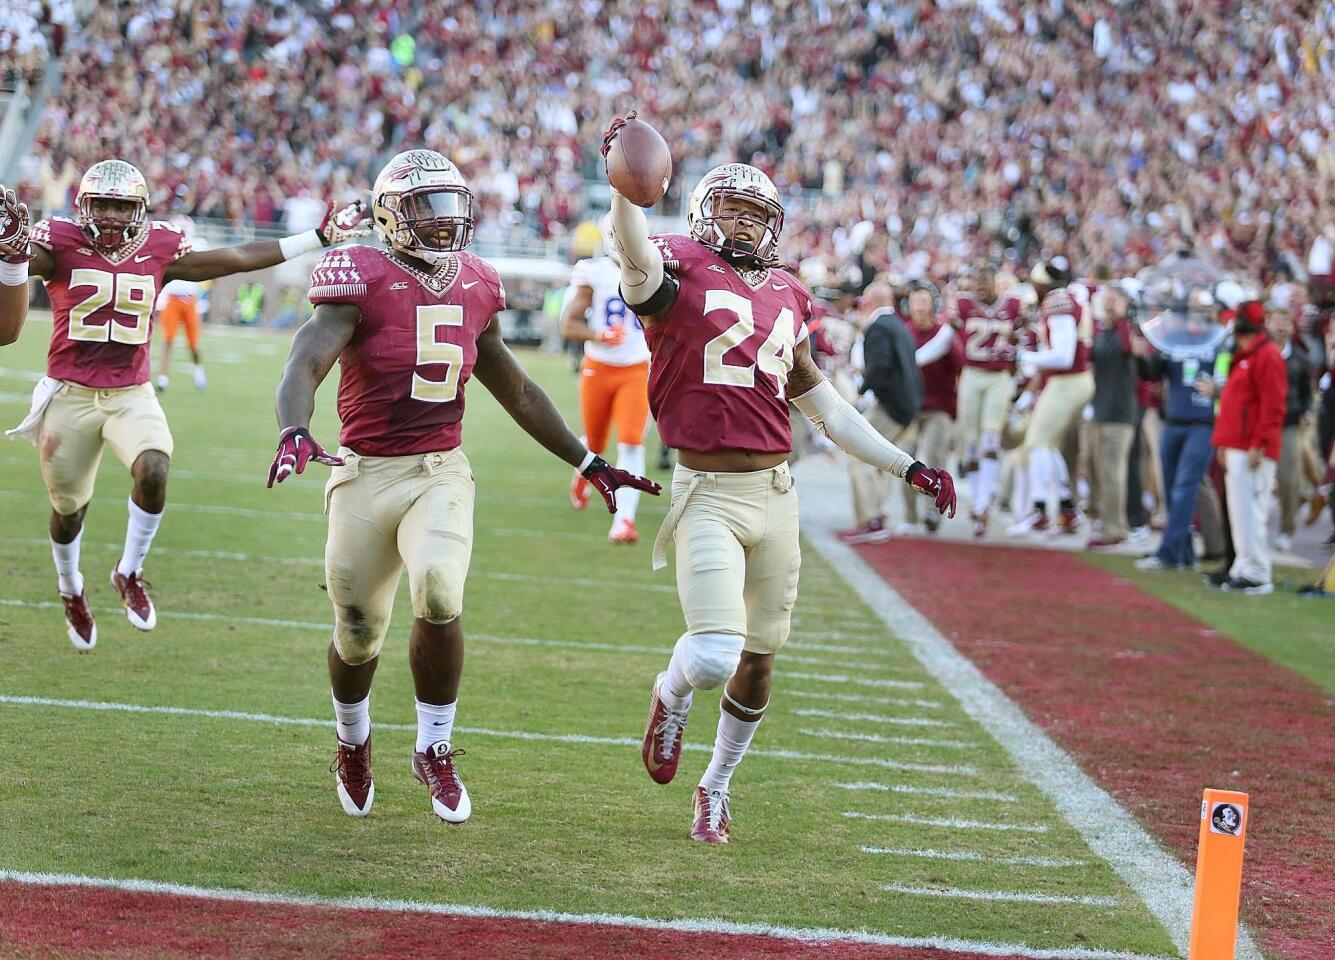 FSU linebacker Terrance Smith (24) runs a 95-yard interception return into the endzone for a touchdown during the Florida at Florida State college football game at Doak Campbell Stadium in Tallahassee